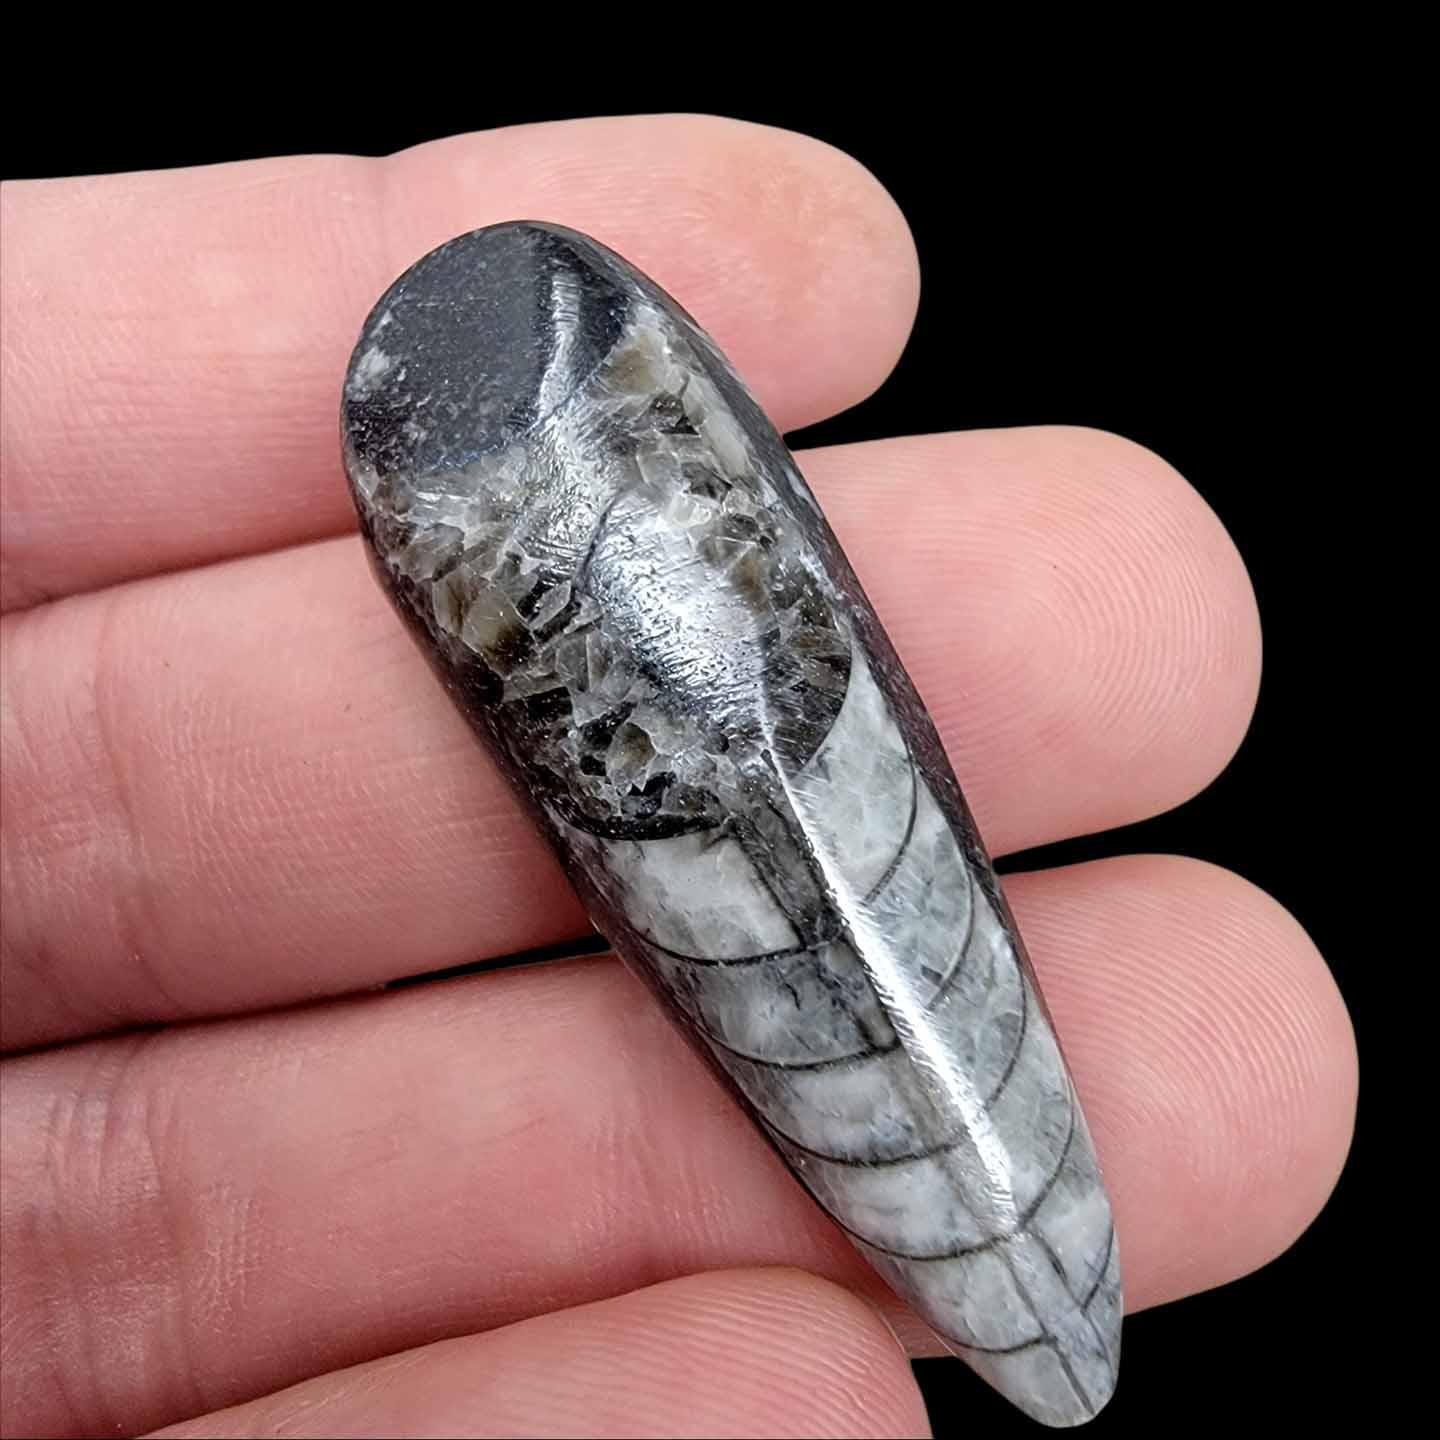 1.5 Inch Polished Fossil Orthoceras Cephalopod from Morocco! - LapidaryCentral